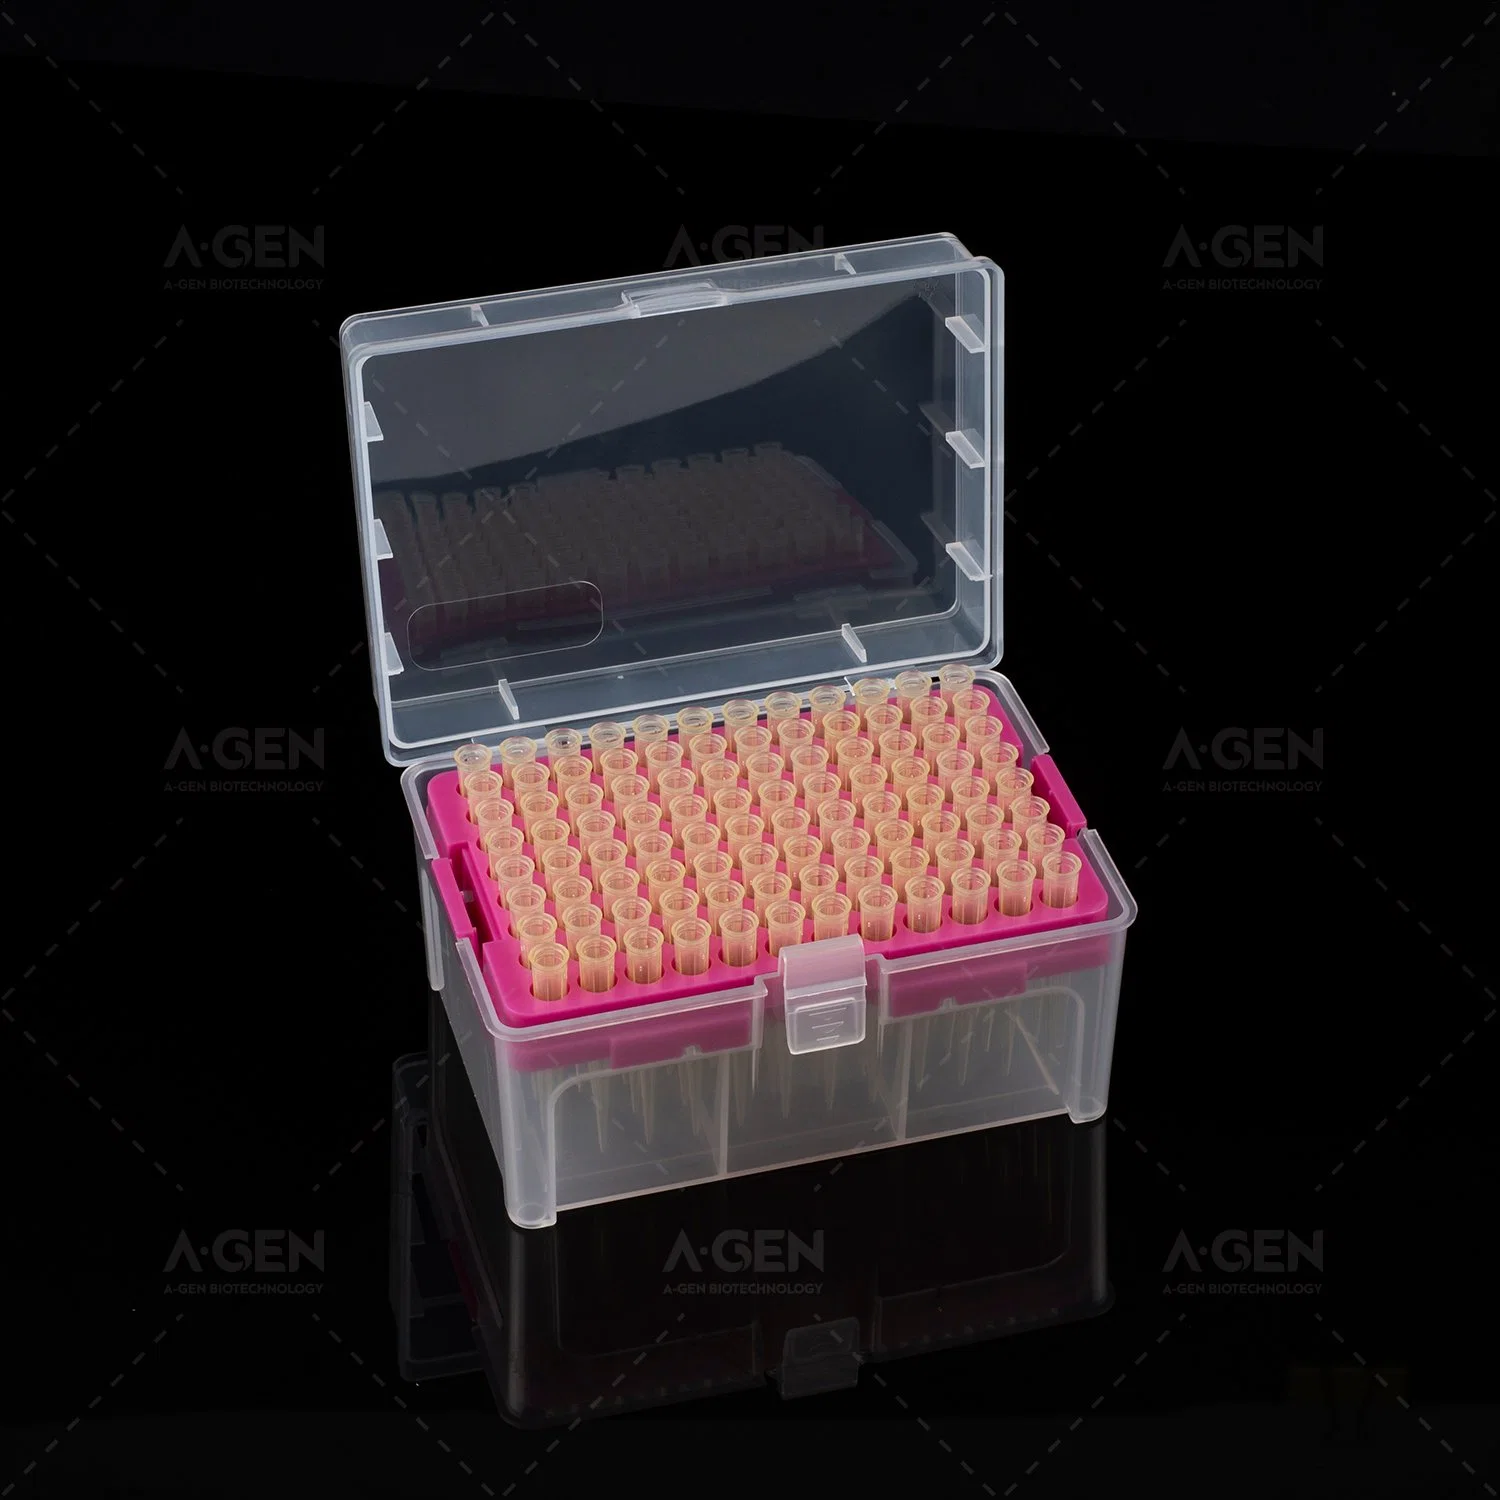 Axygen Pipette Tips 50UL Yellow PP Filter Tip, Rack Package, Sterile, PCR Free Lab Supplies Low Retention Yellow Pipette Tips